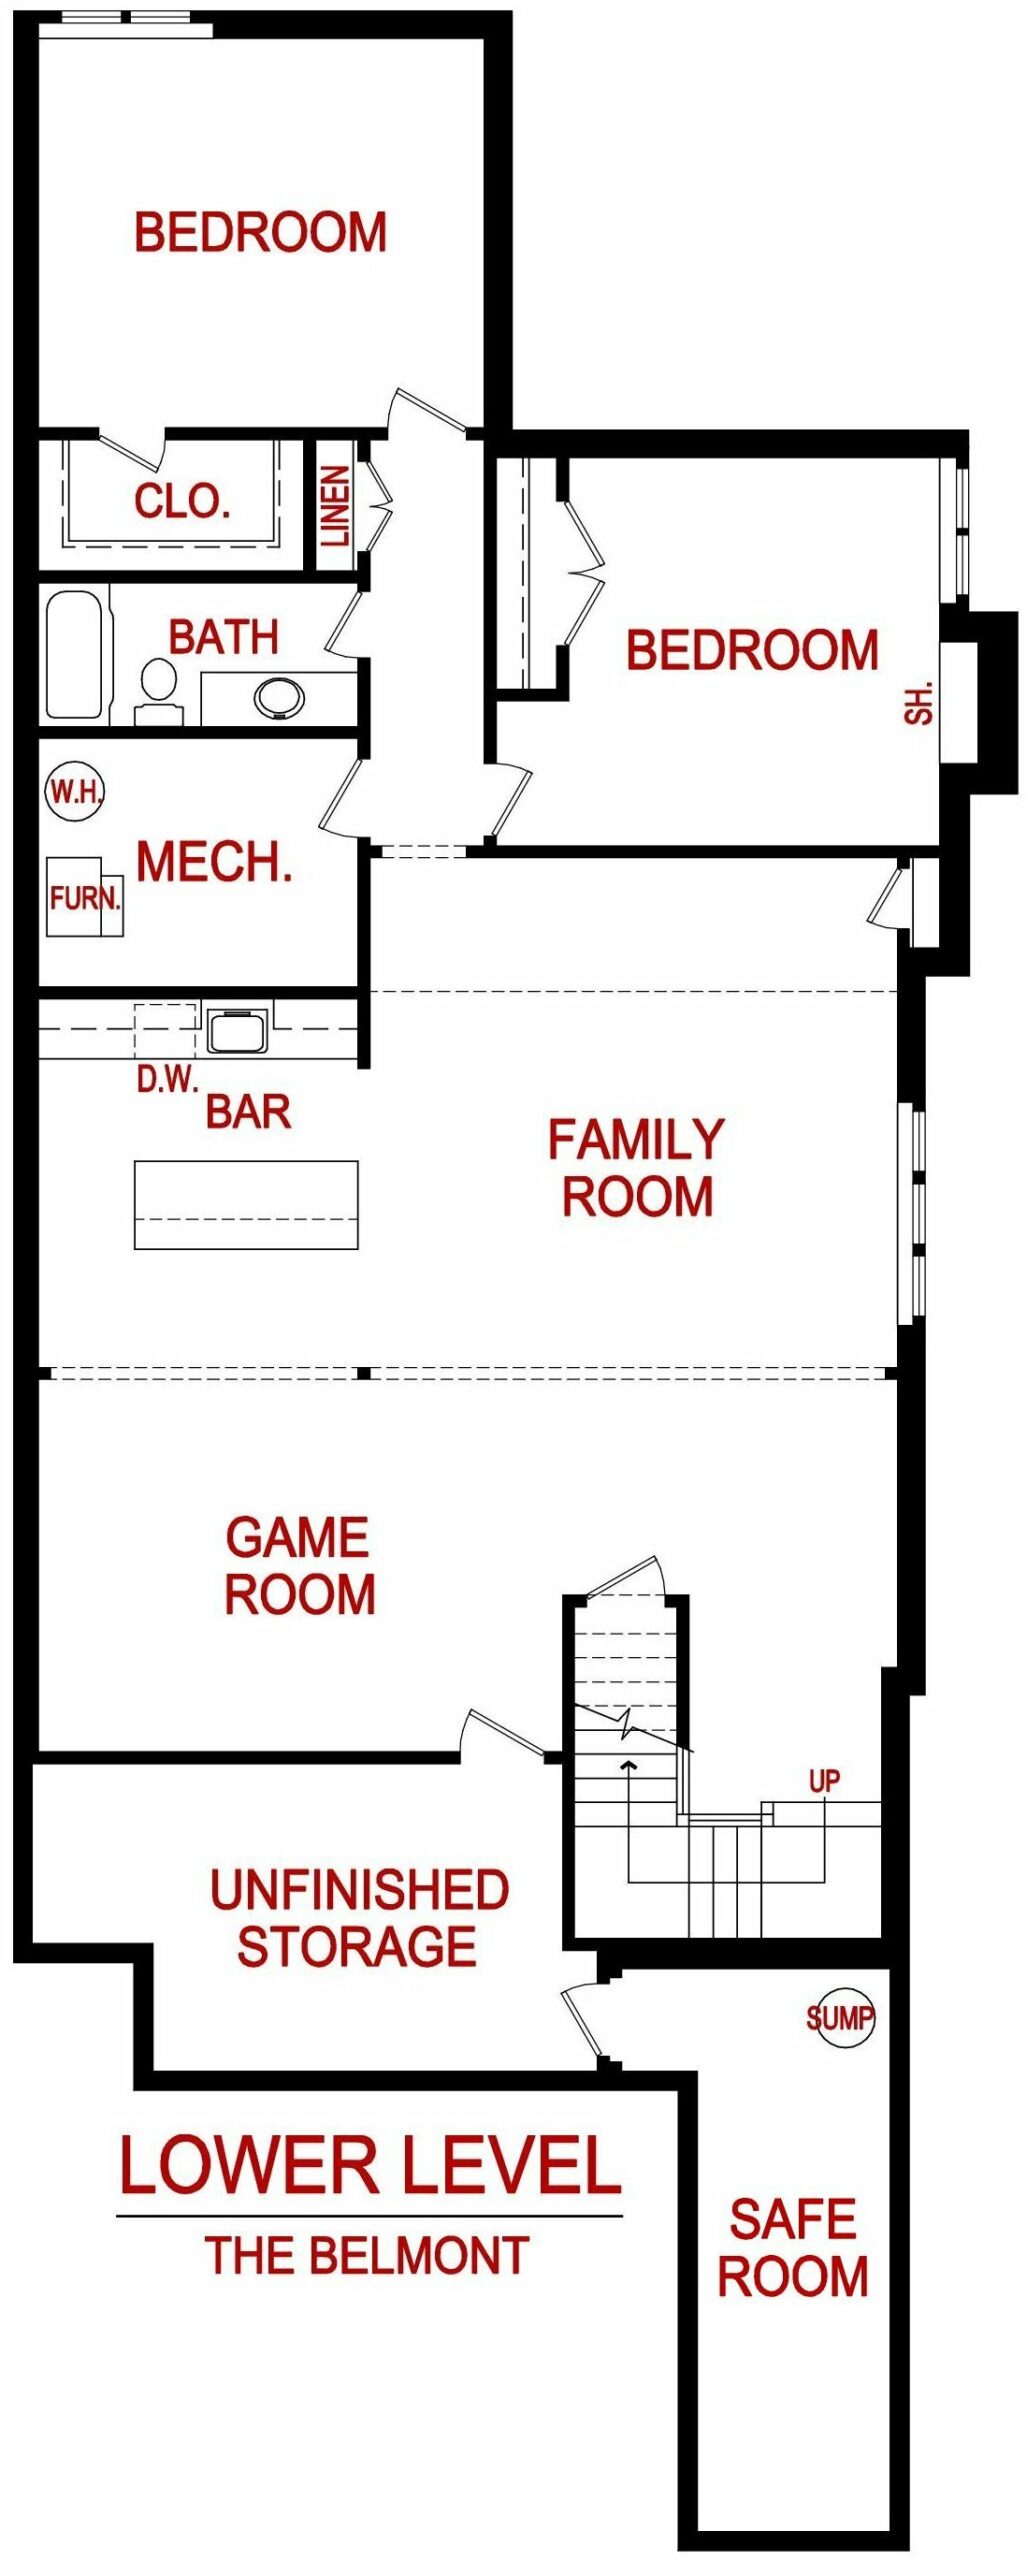 floorplan for the belmont model from lambie homes